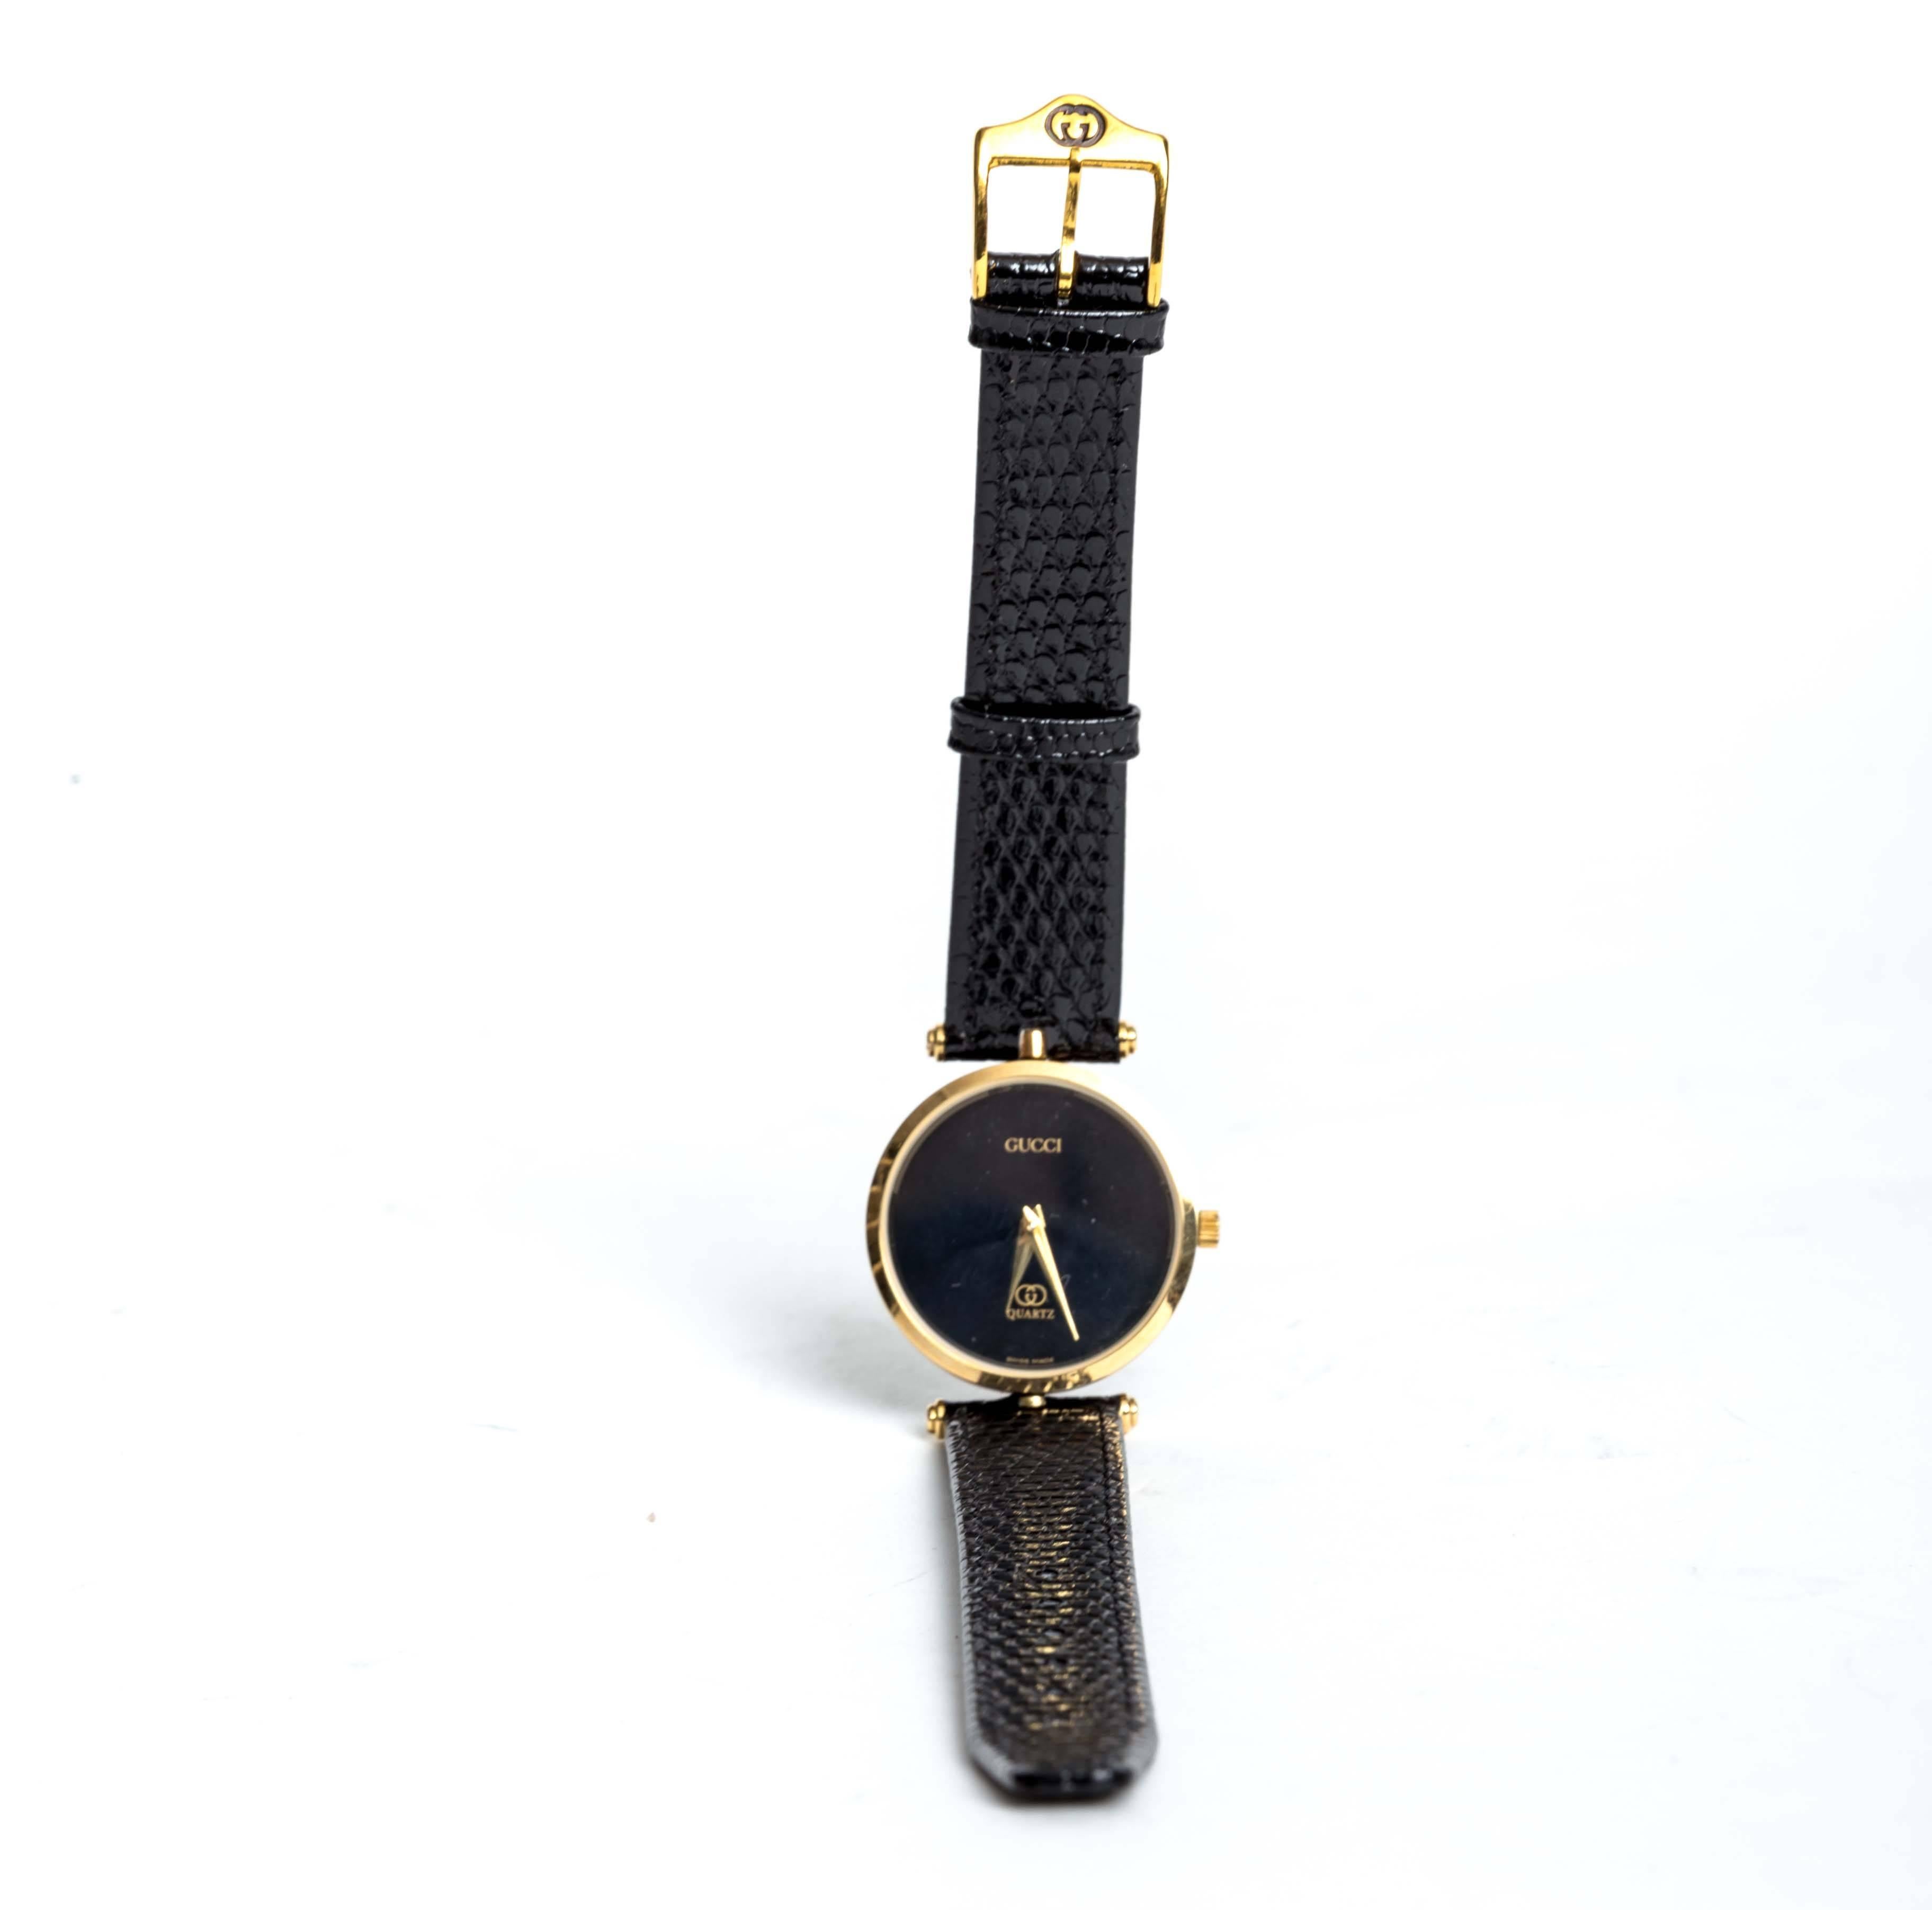 Vintage Gucci Women's Black and Gold Tone Reptile Band Watch 2